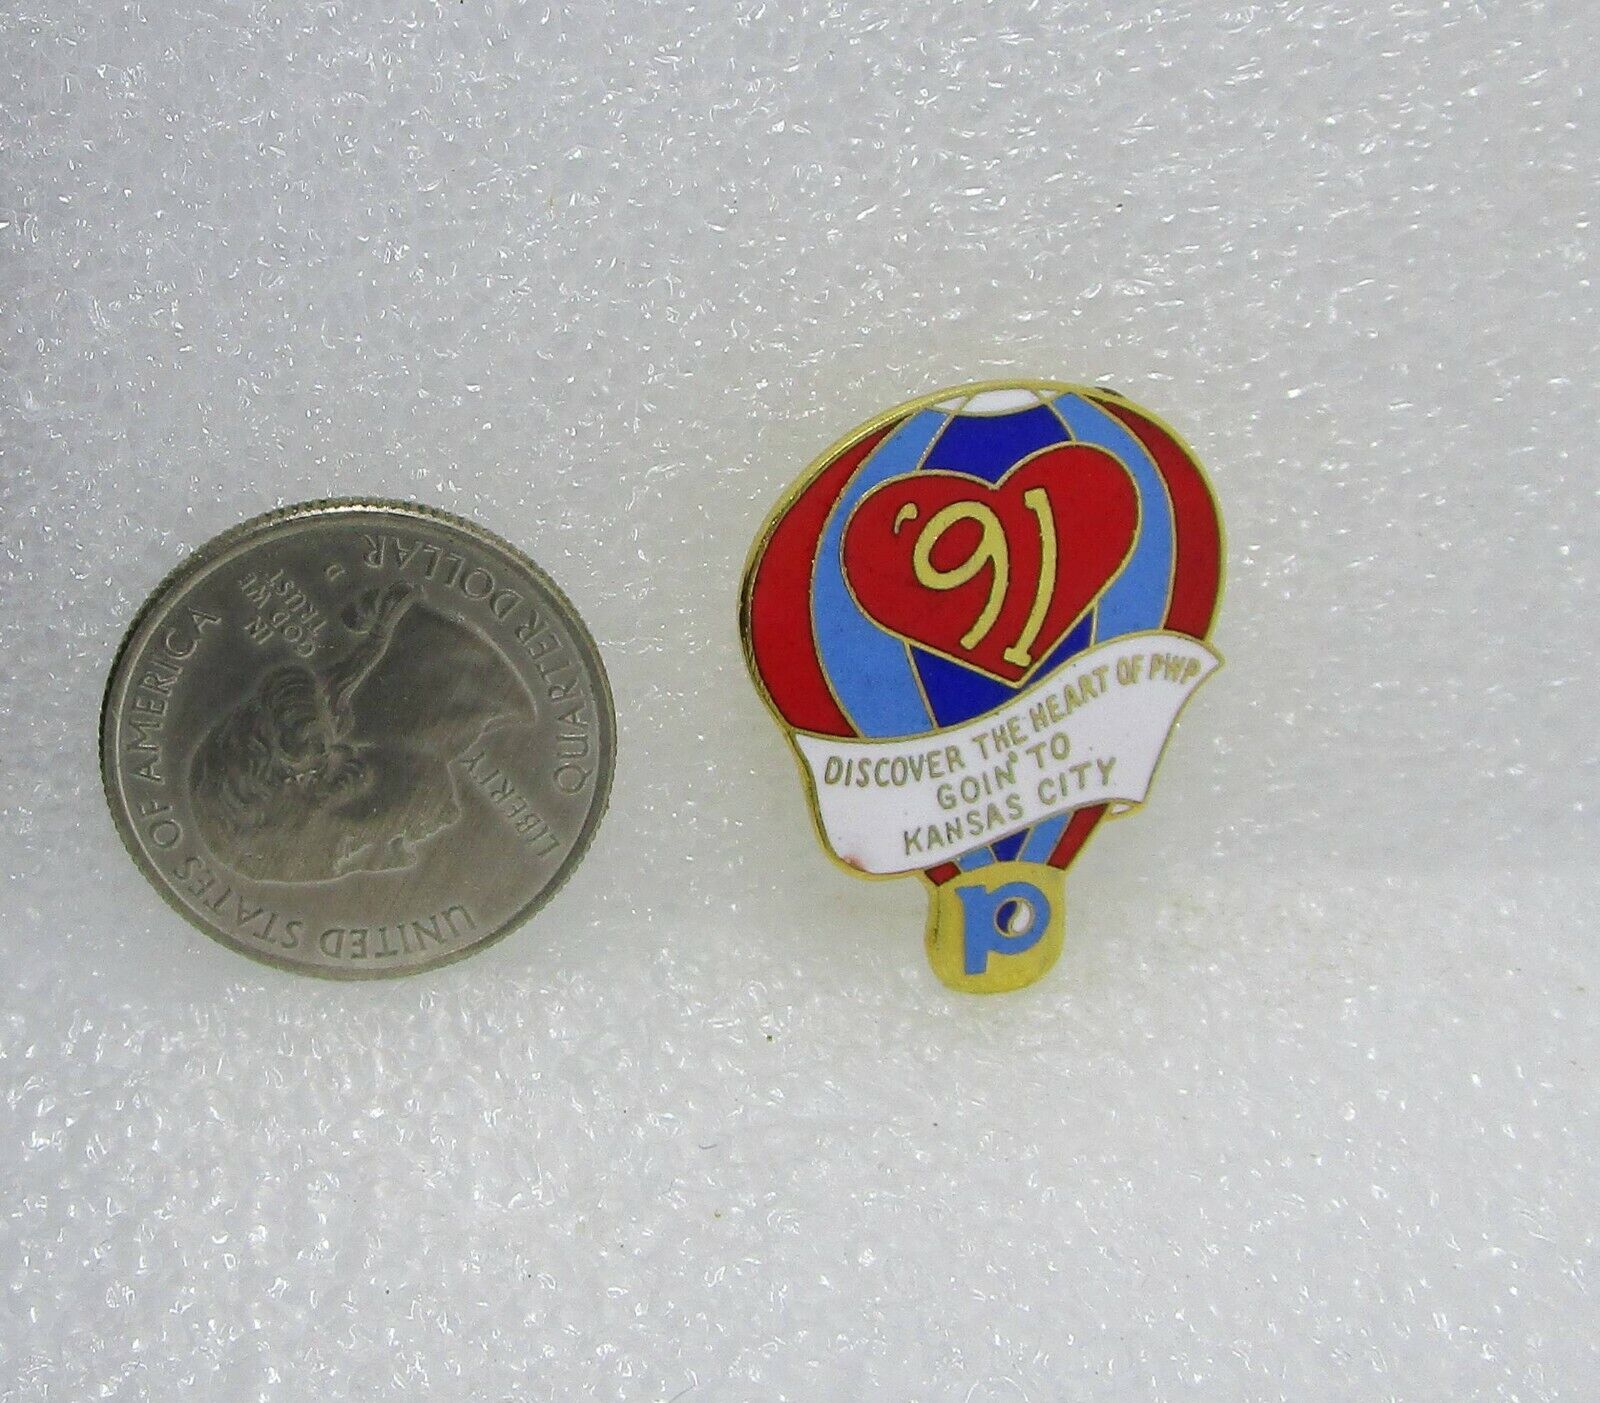 1991 Discover The Heart Of PWP - Goin To Kansas City - Hot Air Balloon Pin